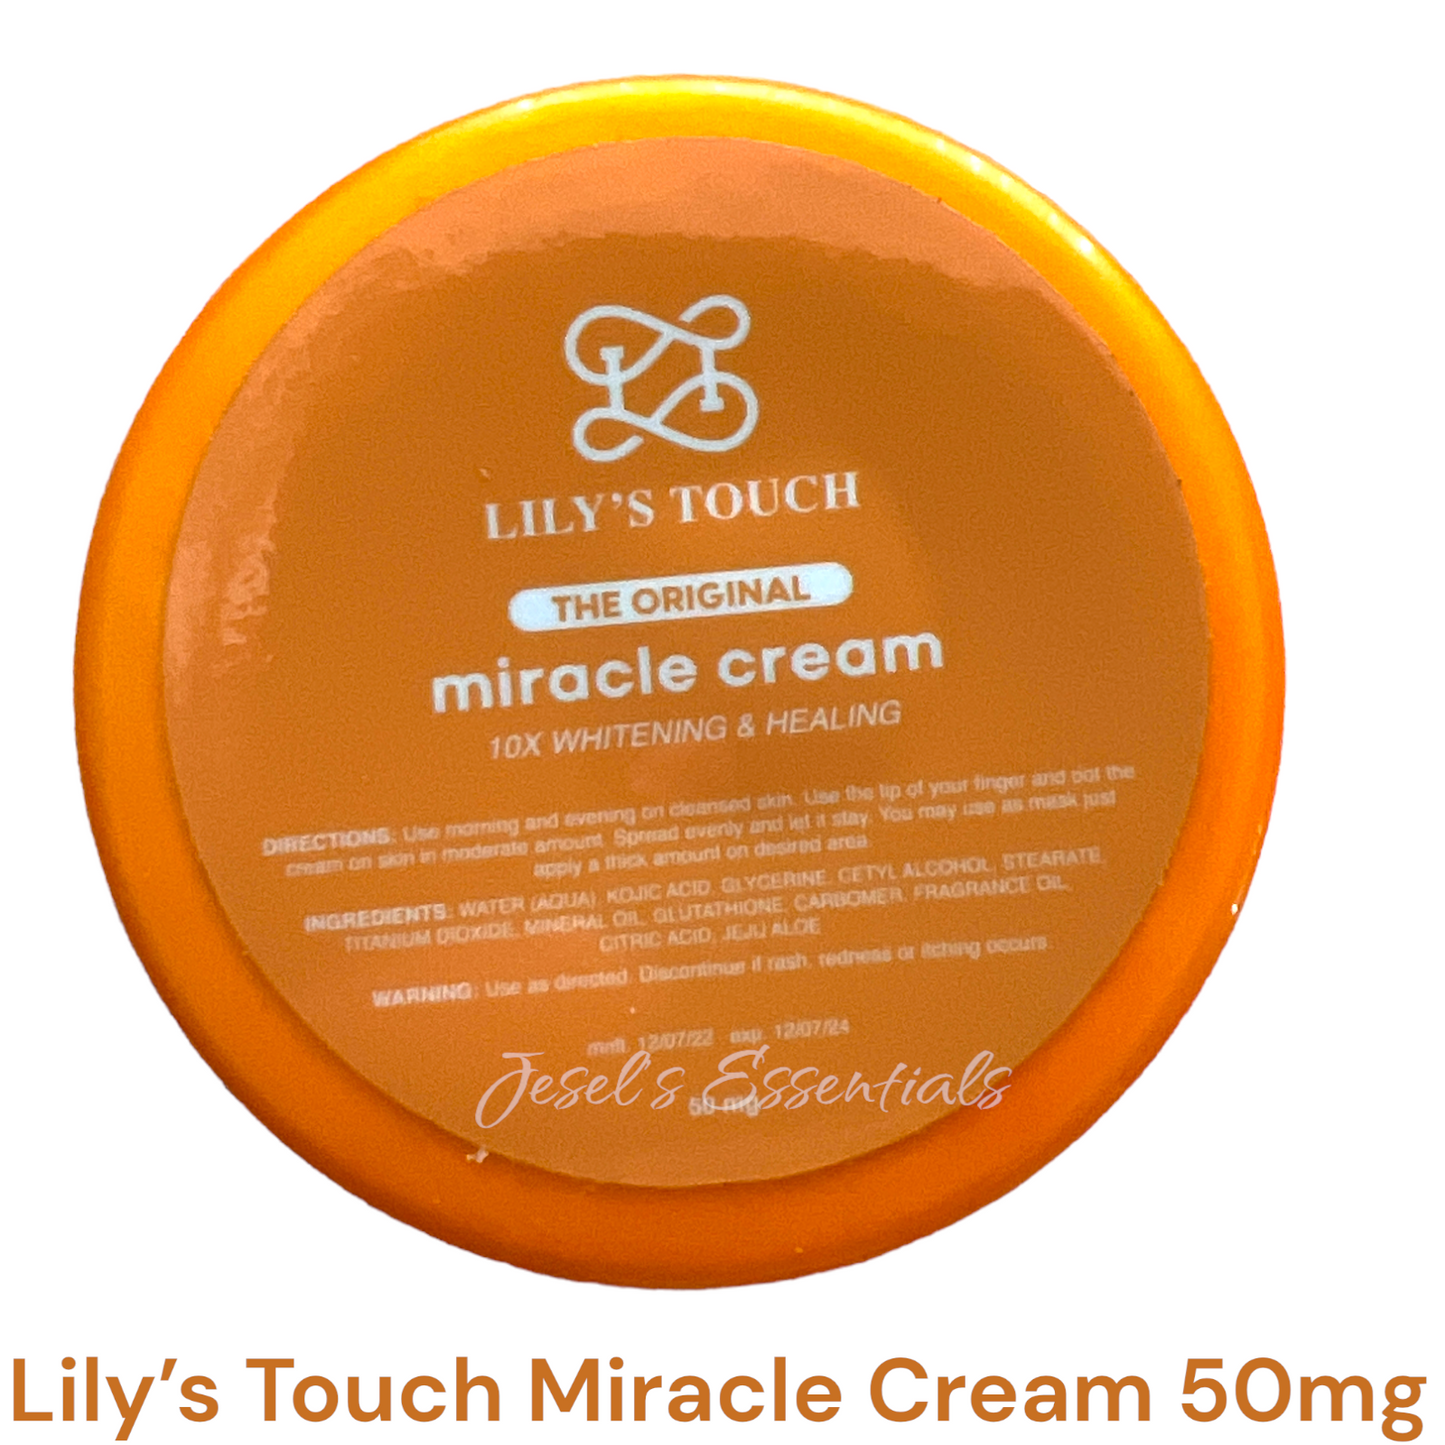 Lily’s Touch Miracle Cream